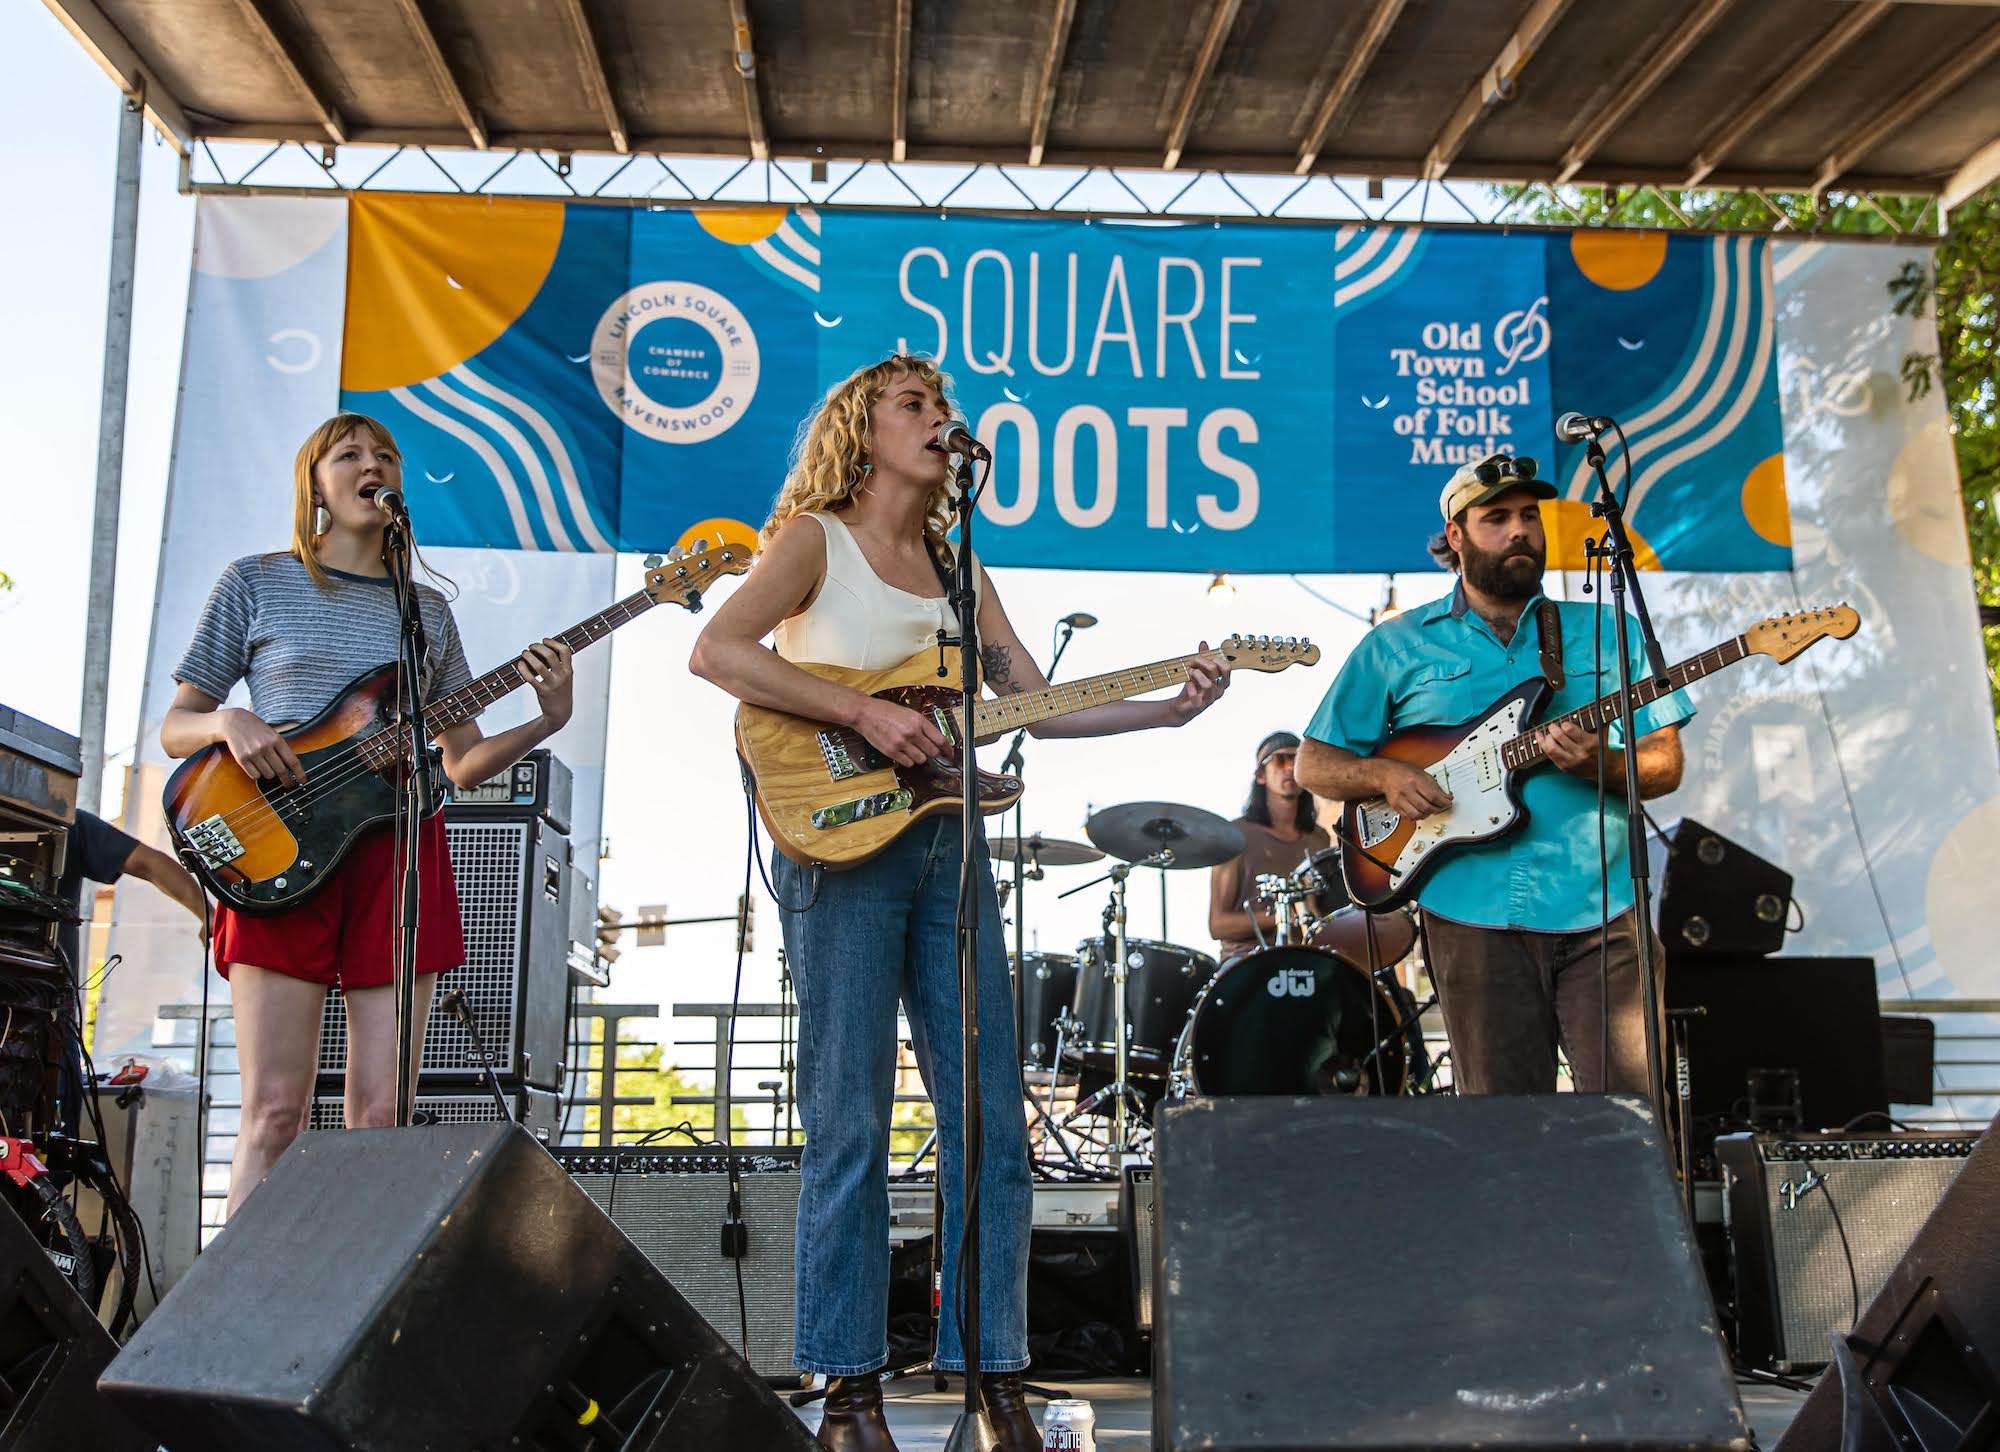 Tobacco City Live at Square Roots Fest [GALLERY] 4